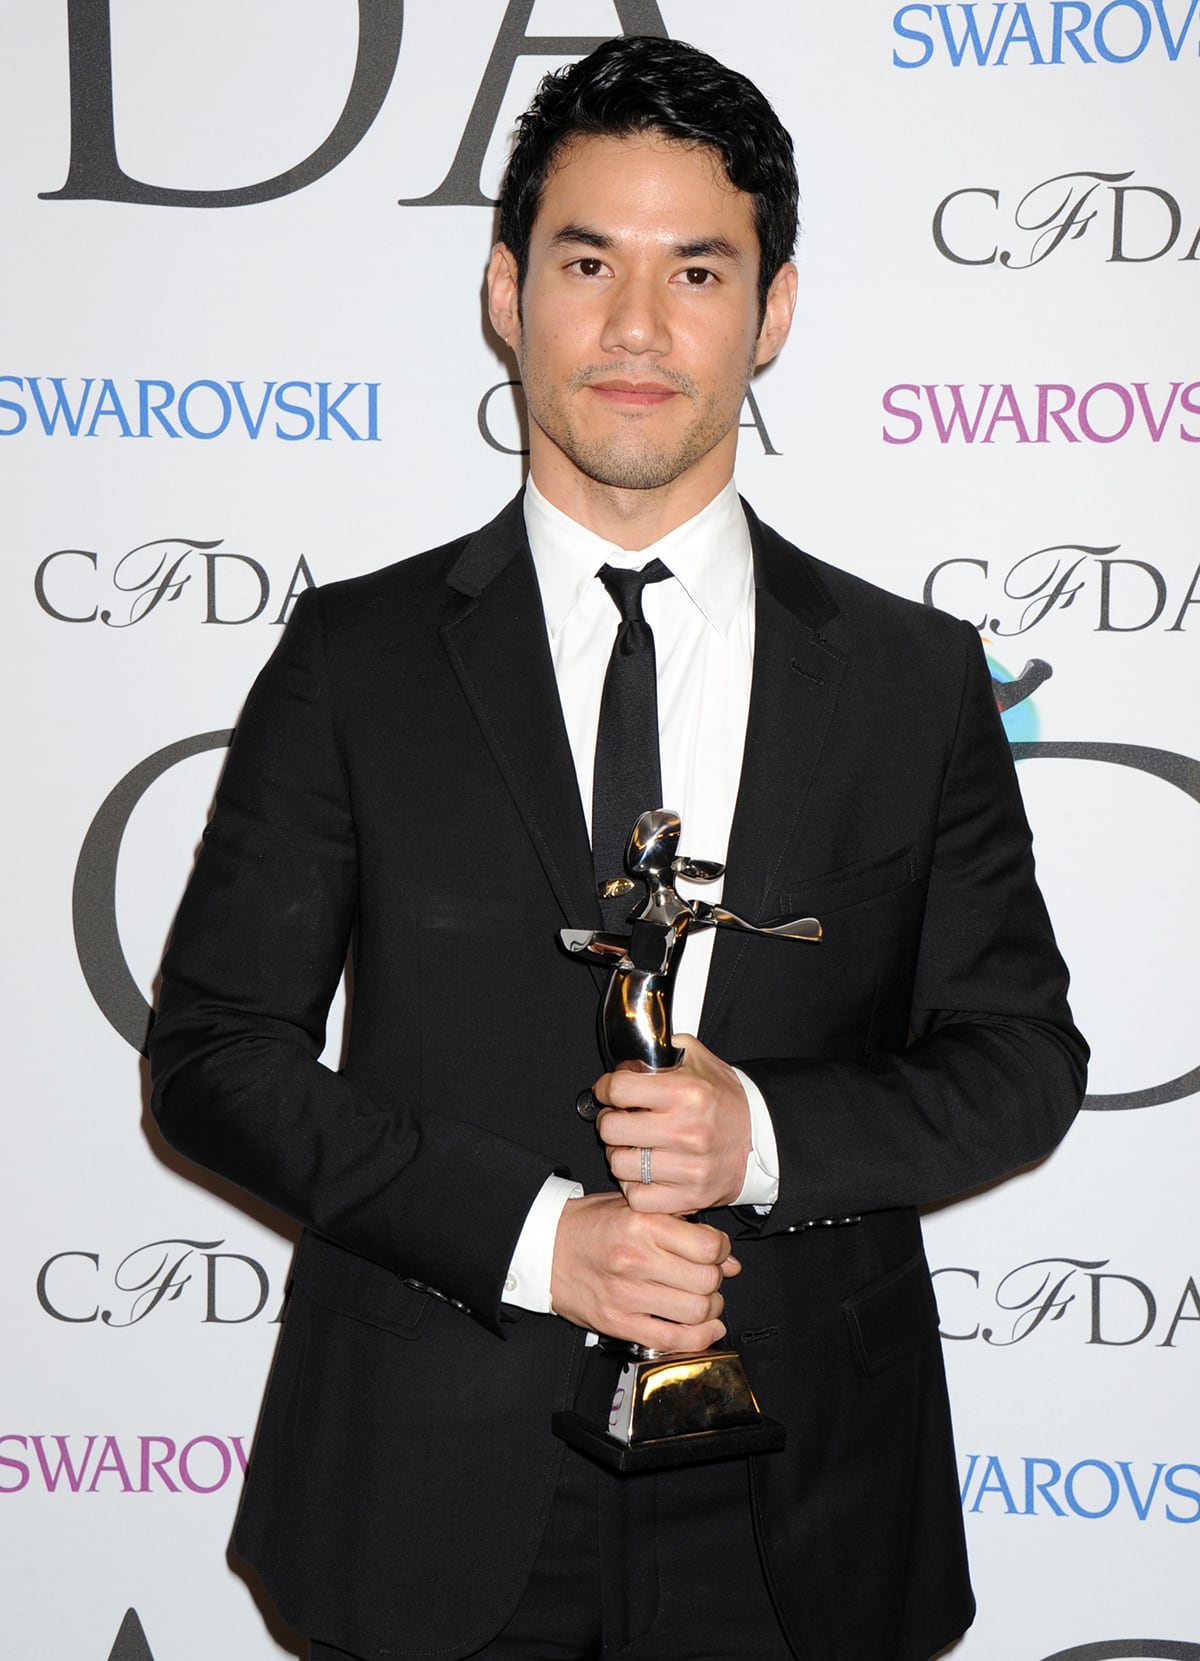 Joseph Altuzarra was named by the Council of Fashion Designers America (CFDA) as the 2014 Womenswear Designer of the Year